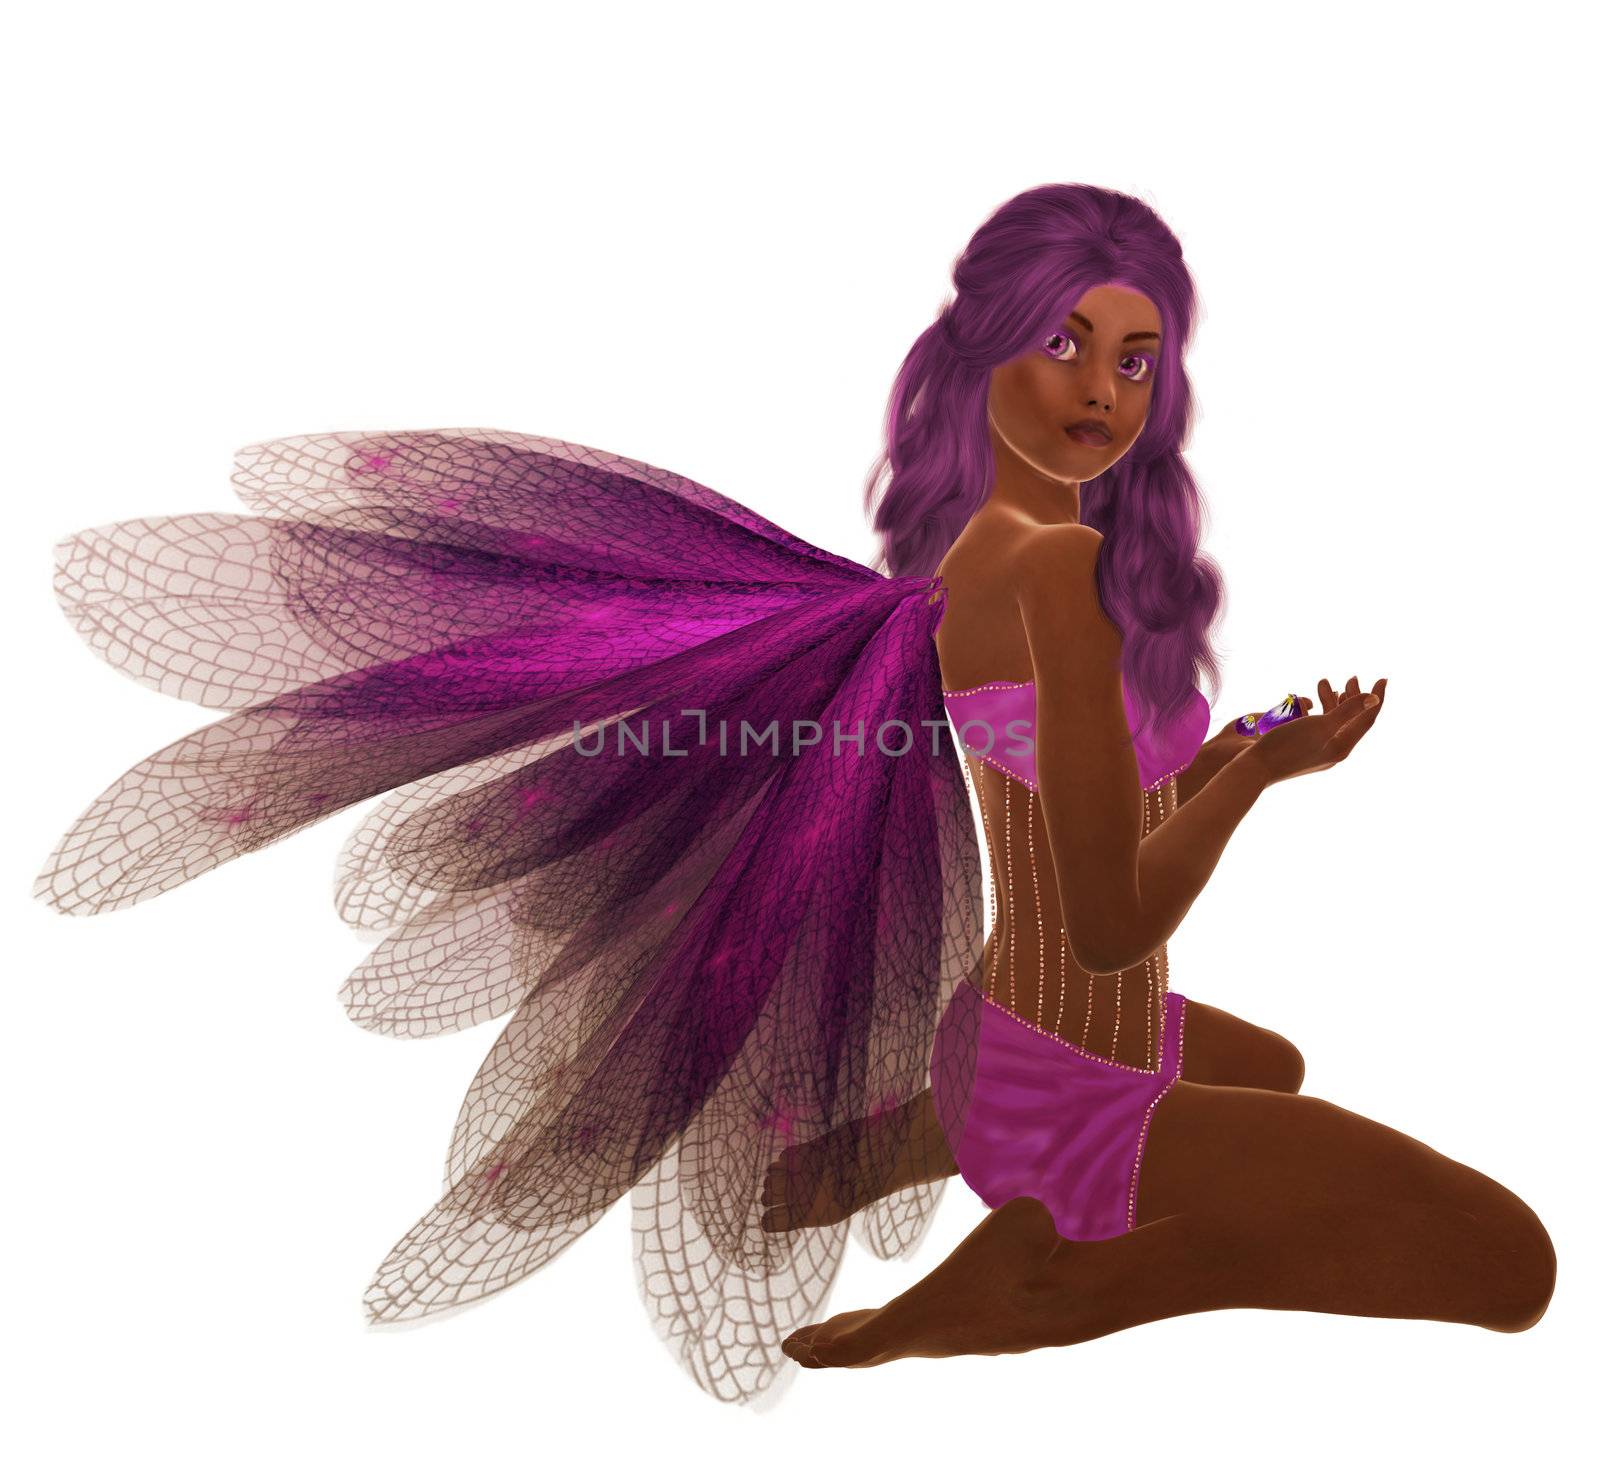 Purple fairy with purple hair, sitting holding flowers in her hand